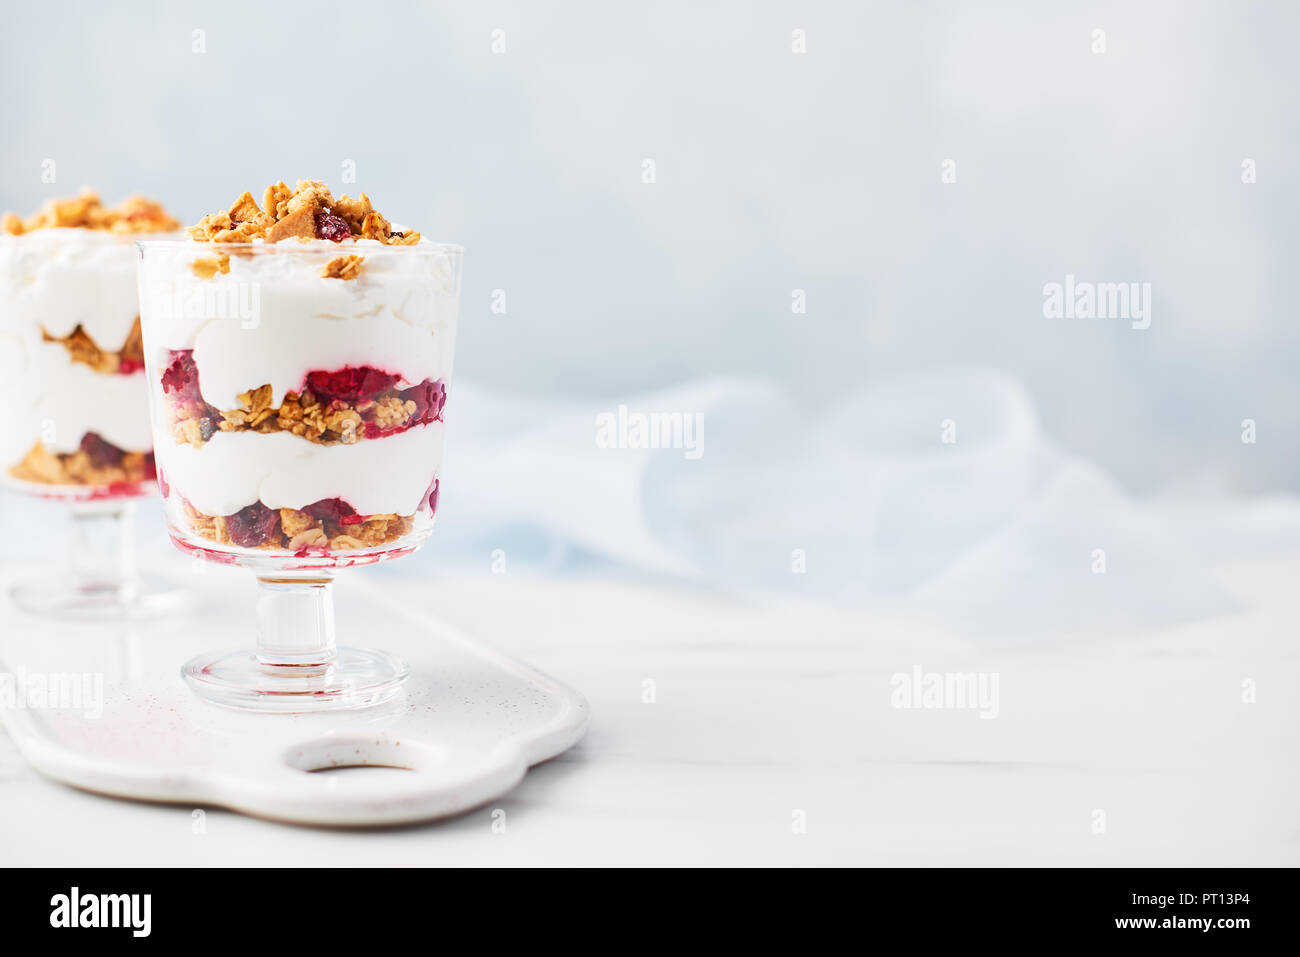 Healthy raspberry yogurt parfait in a glass on white marble table over light blue background with copy space. Stock Photo